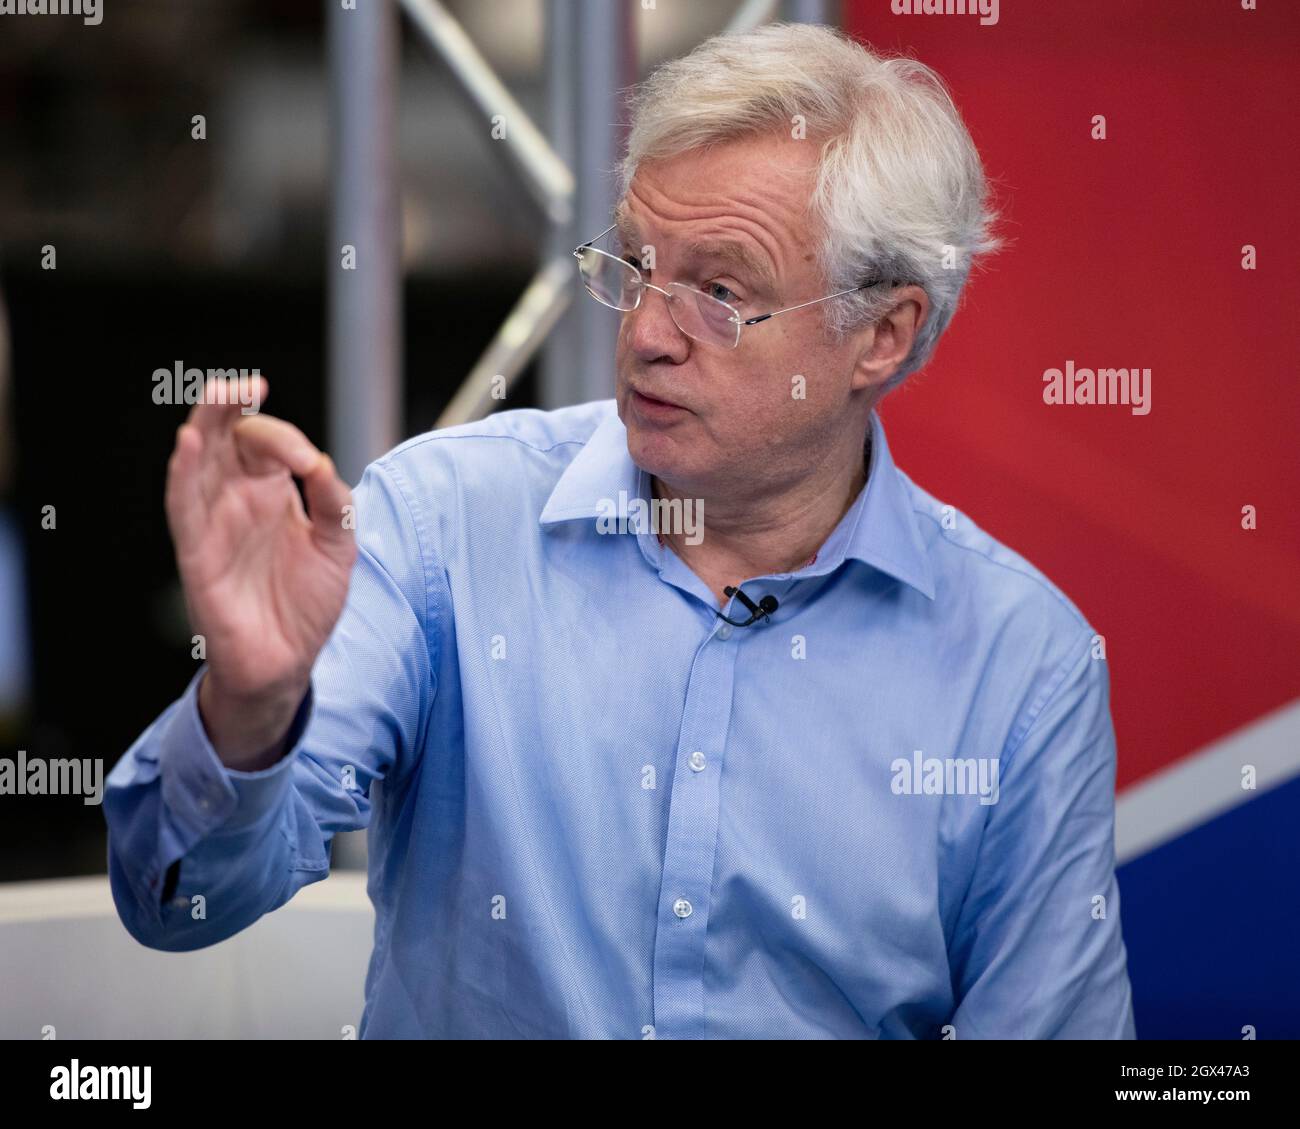 Manchester, England, UK. 4th Oct, 2021. PICTURED: David Davis MP, Former Brexit Cabinet Secretary speaking live on GB News. Scenes from the morning at the Conservative Party Conference Credit: Colin Fisher/Alamy Live News Stock Photo